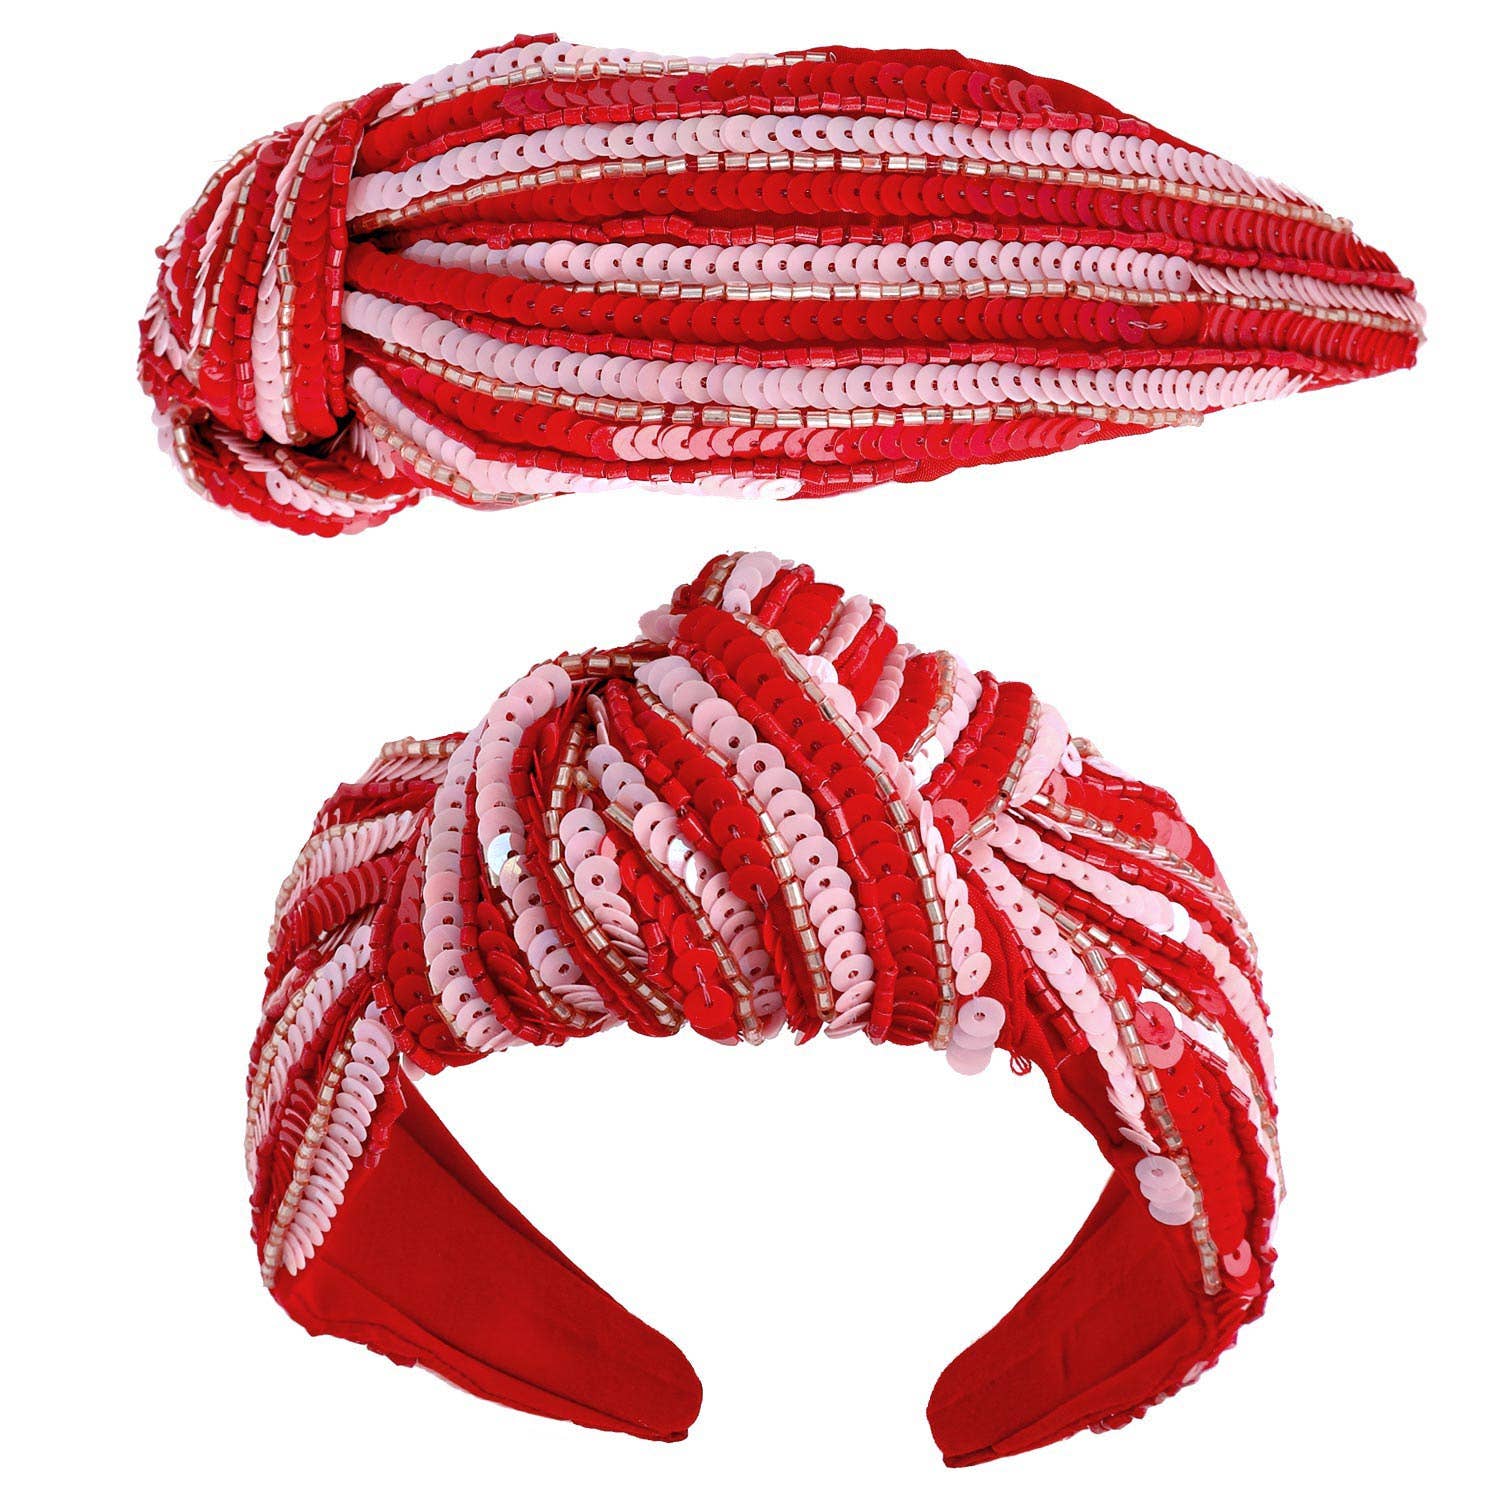 Sequin Striped Top Knotted Embellished Headband: Fuchsia